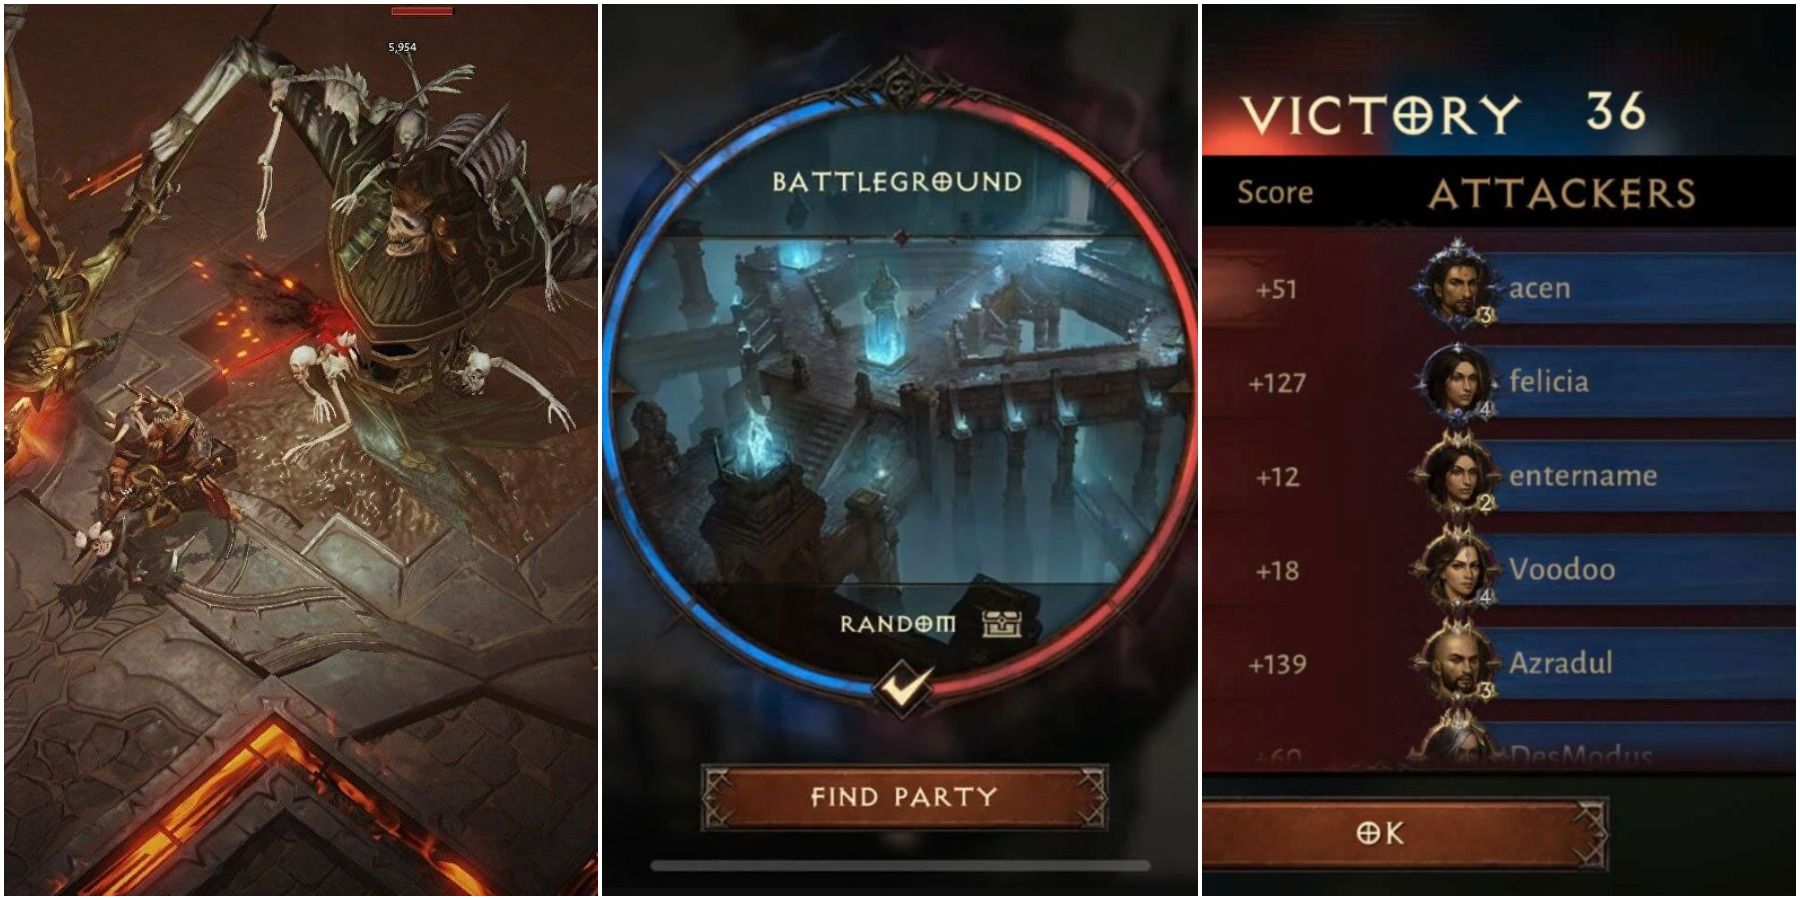 Diablo Immortal Pro Tips For The PvP Battlegrounds Mode